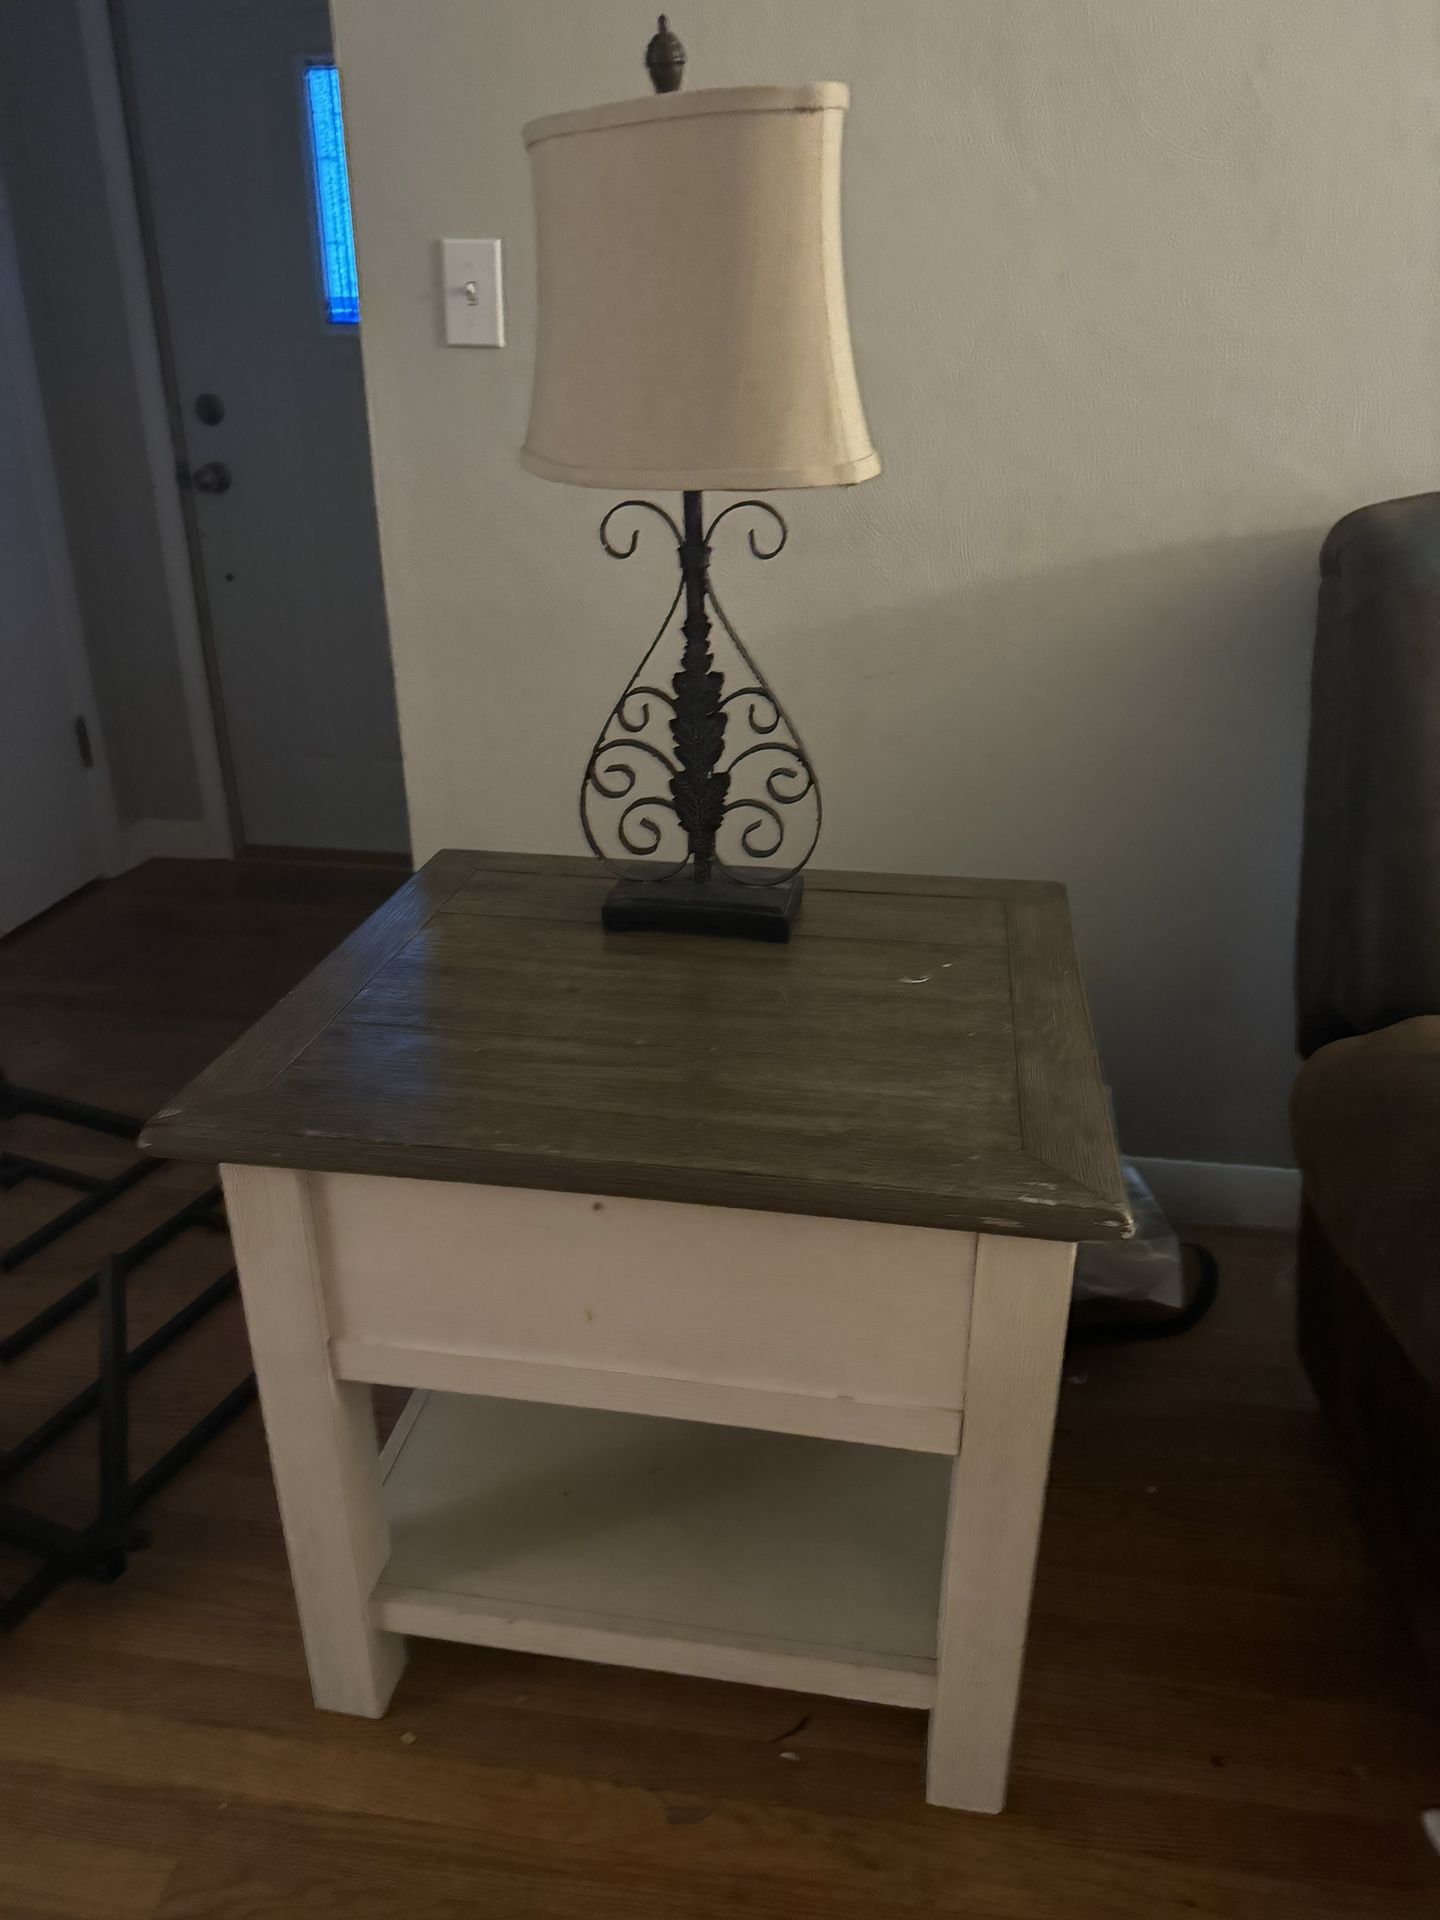 Moving Sale! 2 End Tables And 2 Lamps 